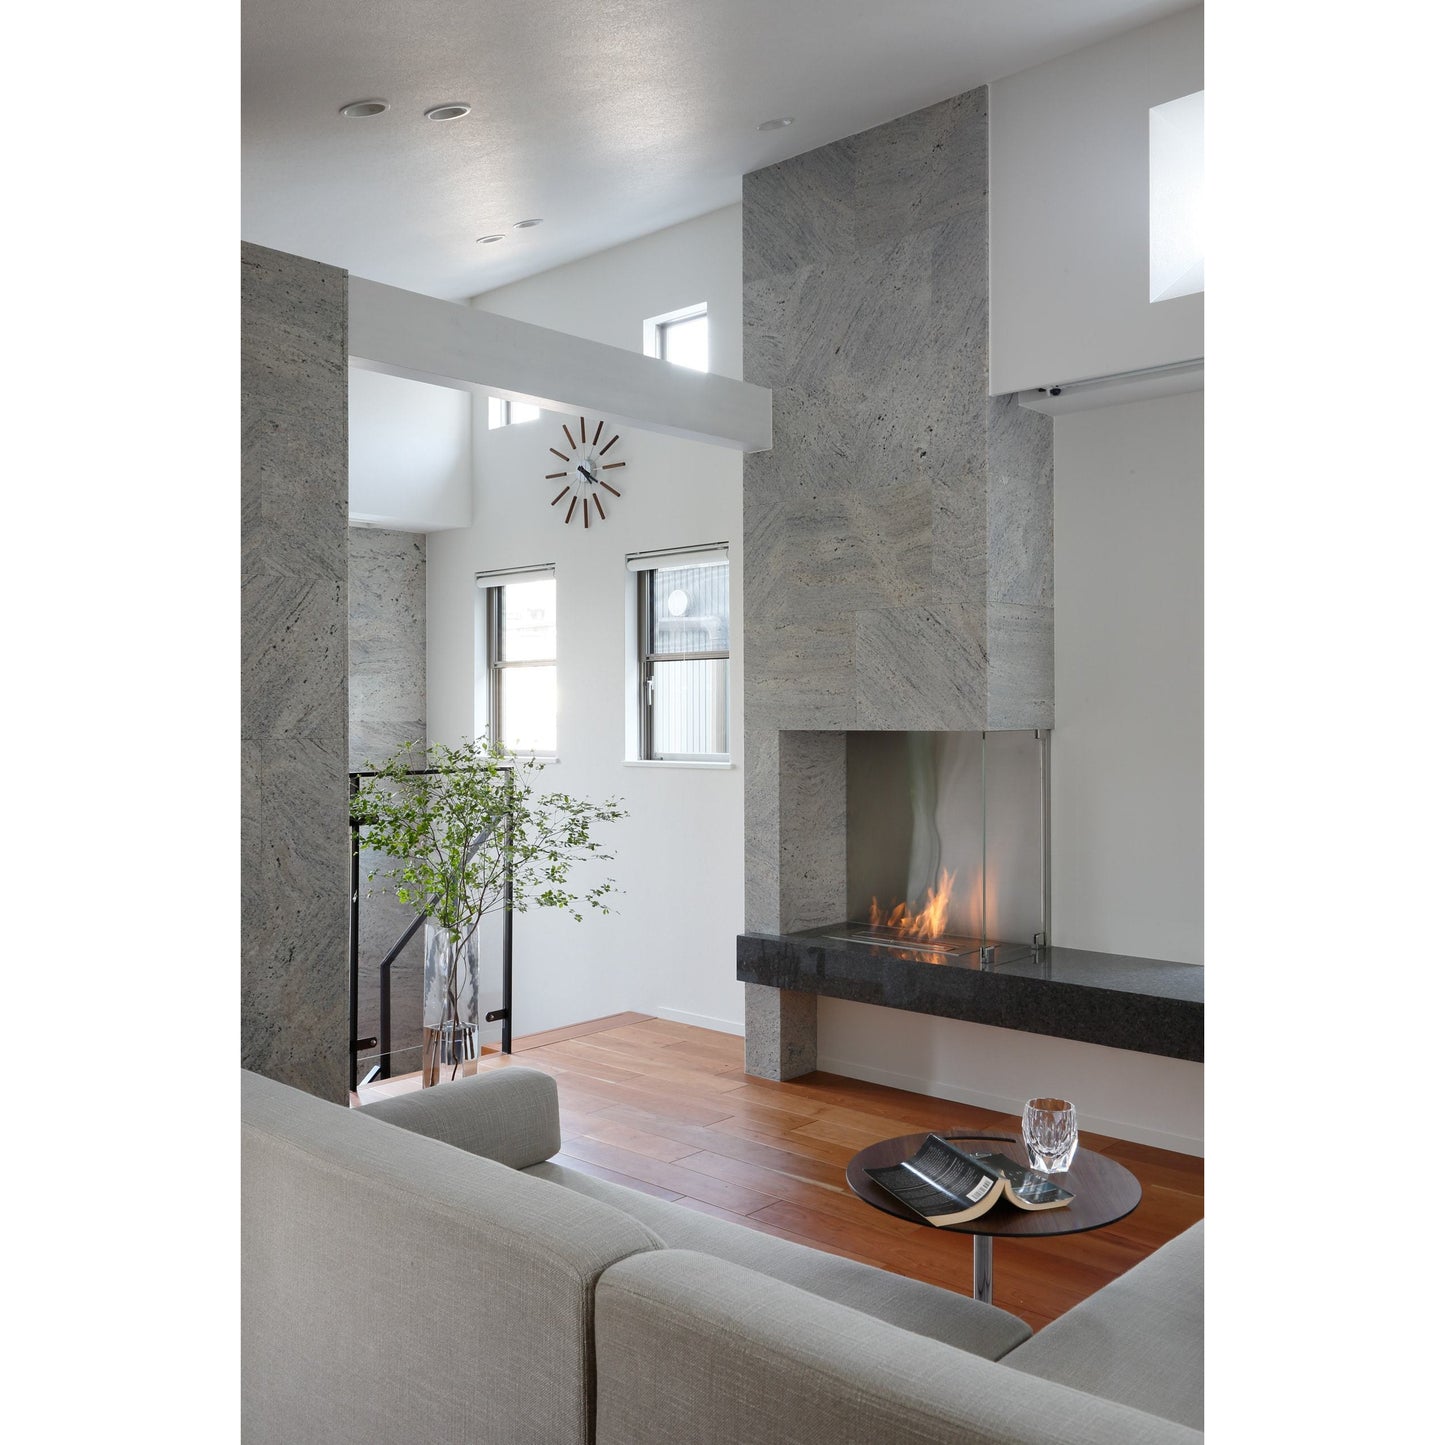 Luxurious, eco-friendly, XL500 bio ethanol burner in stainless steel by EcoSmart Fire for sale.  Create your own bespoke fireplace or replace an old fireplace